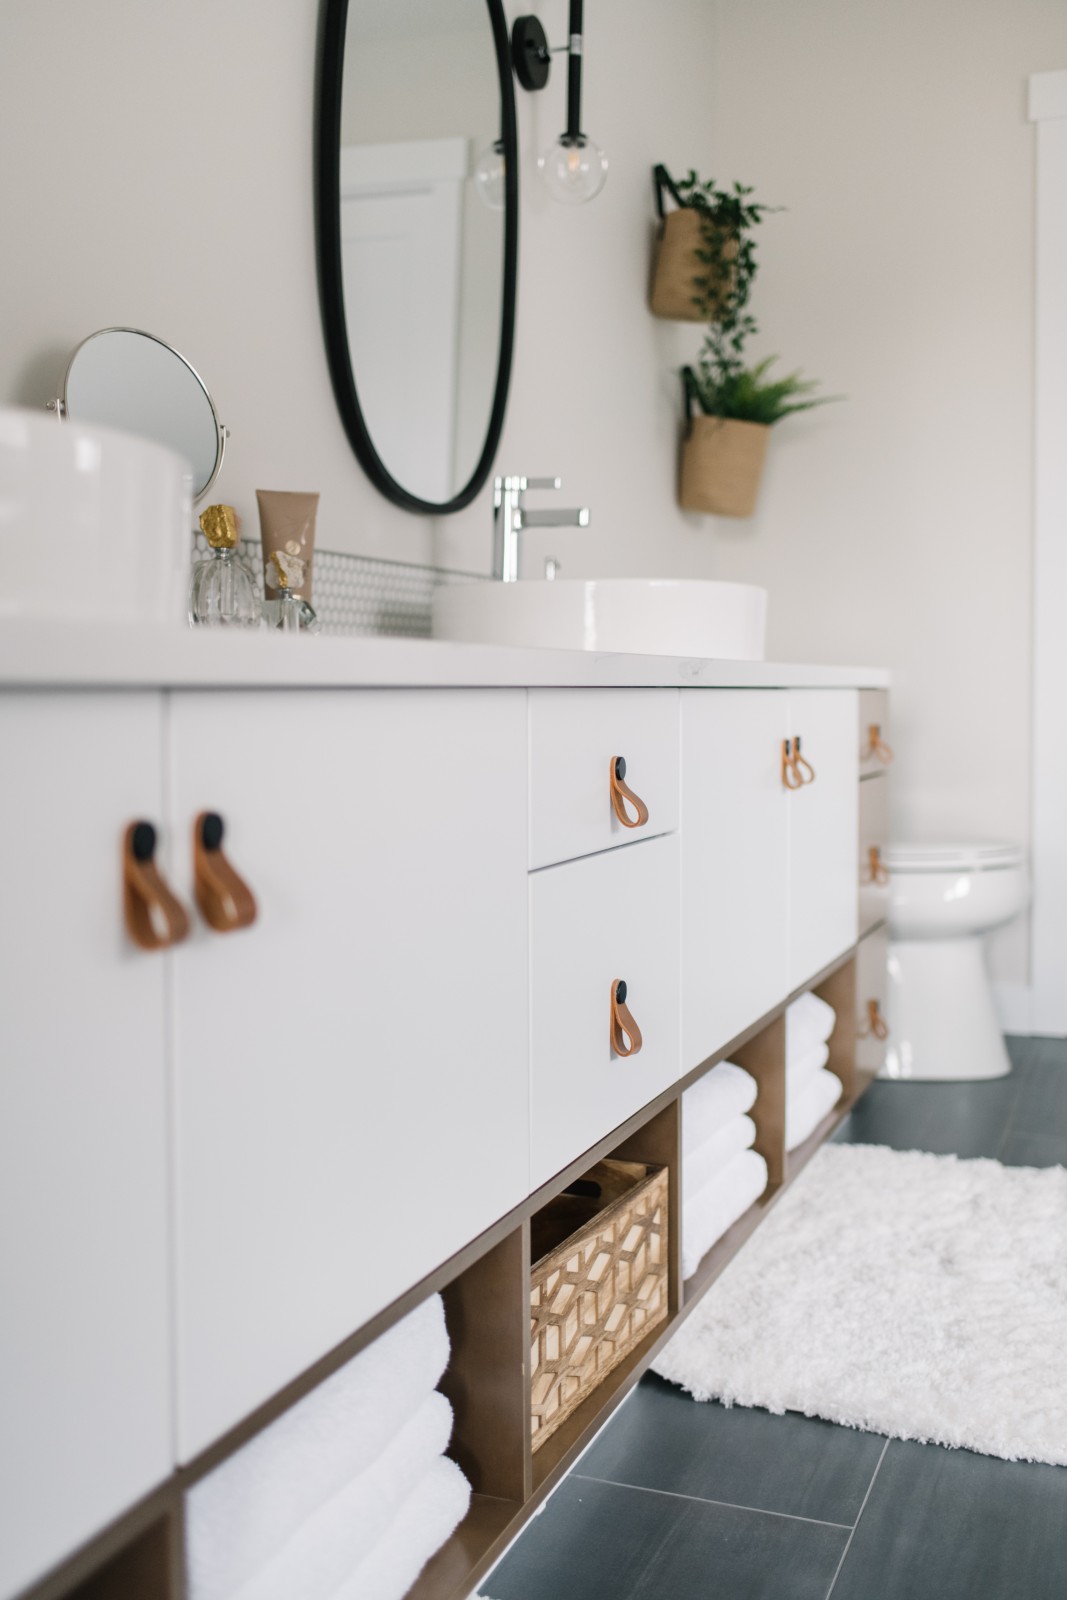 A long sleek white vanity with cognac leather pulls and coordinating wood shelves. Large black framed, oval mirrors can be seen hanging above the vessel sinks on the white countertops